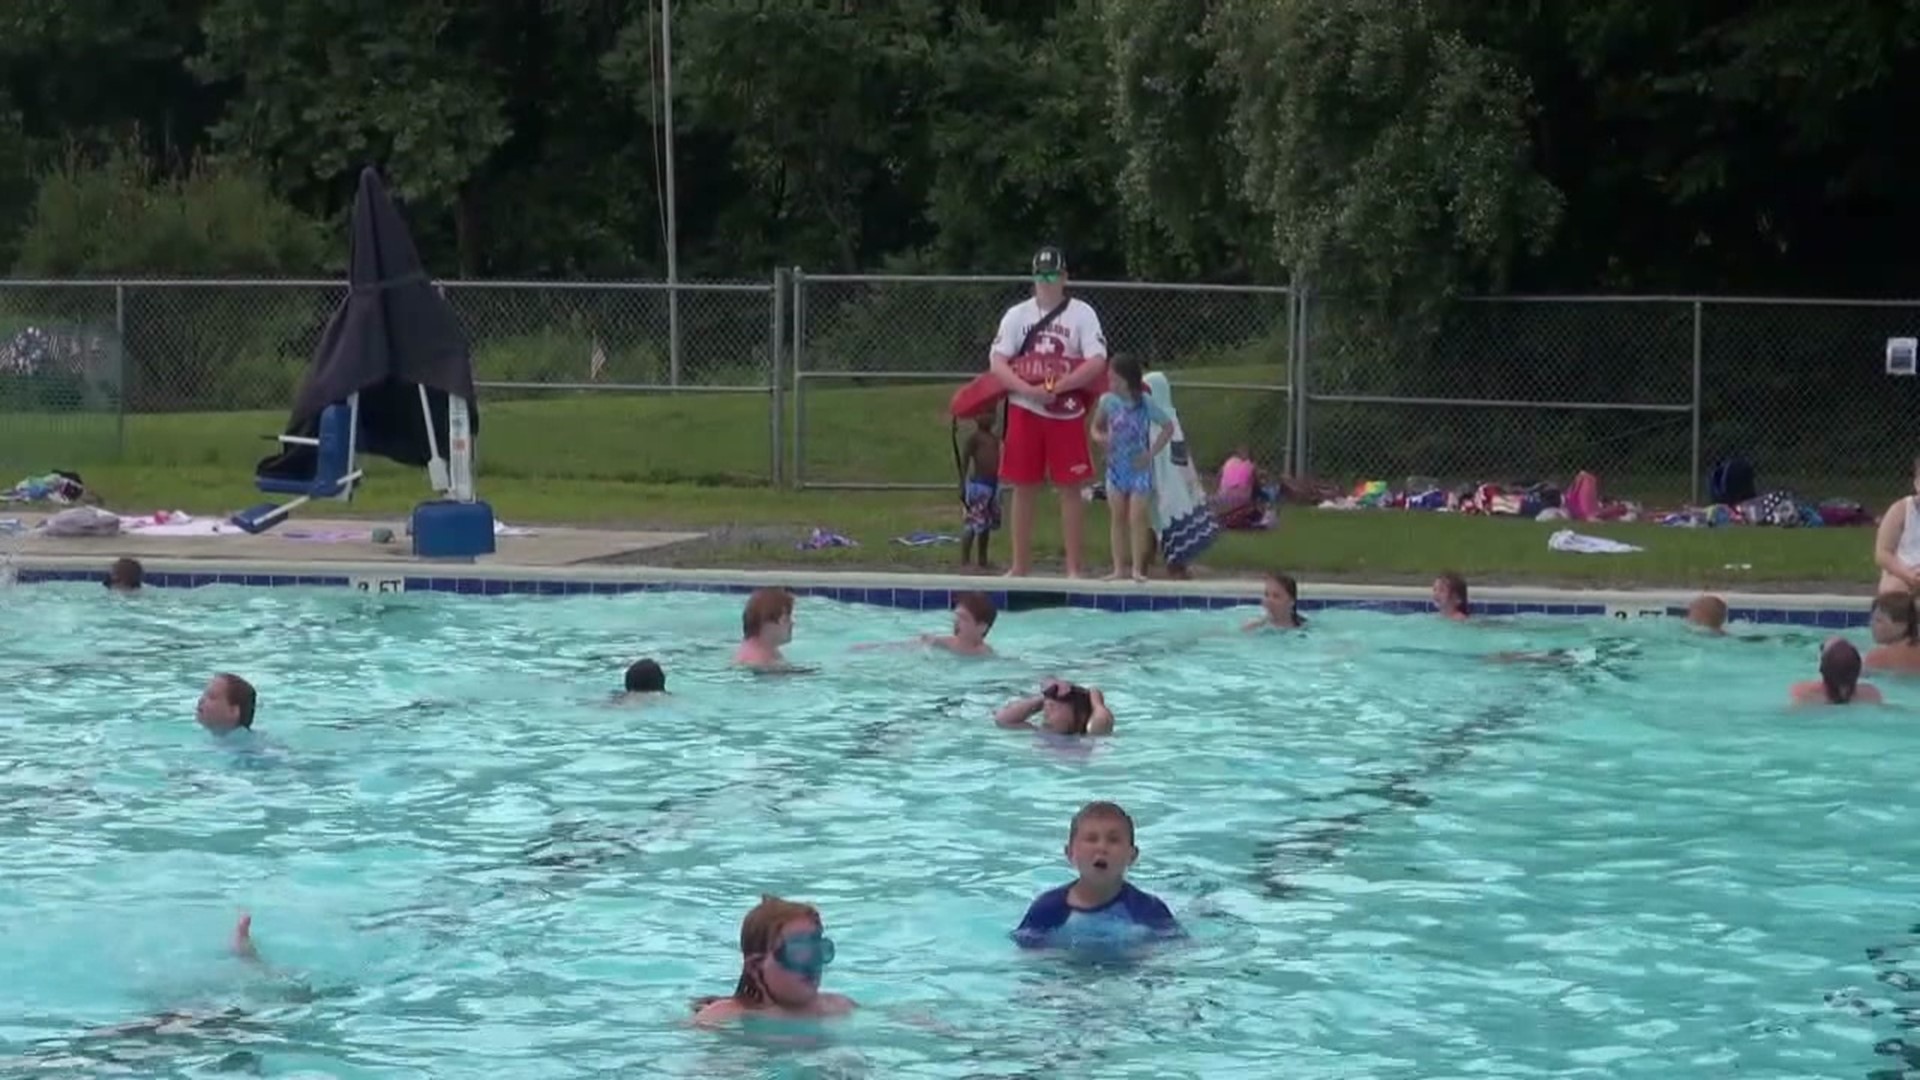 There's snow on the ground and no sign of summertime, but the community in Wayne County is already thinking of pool season.